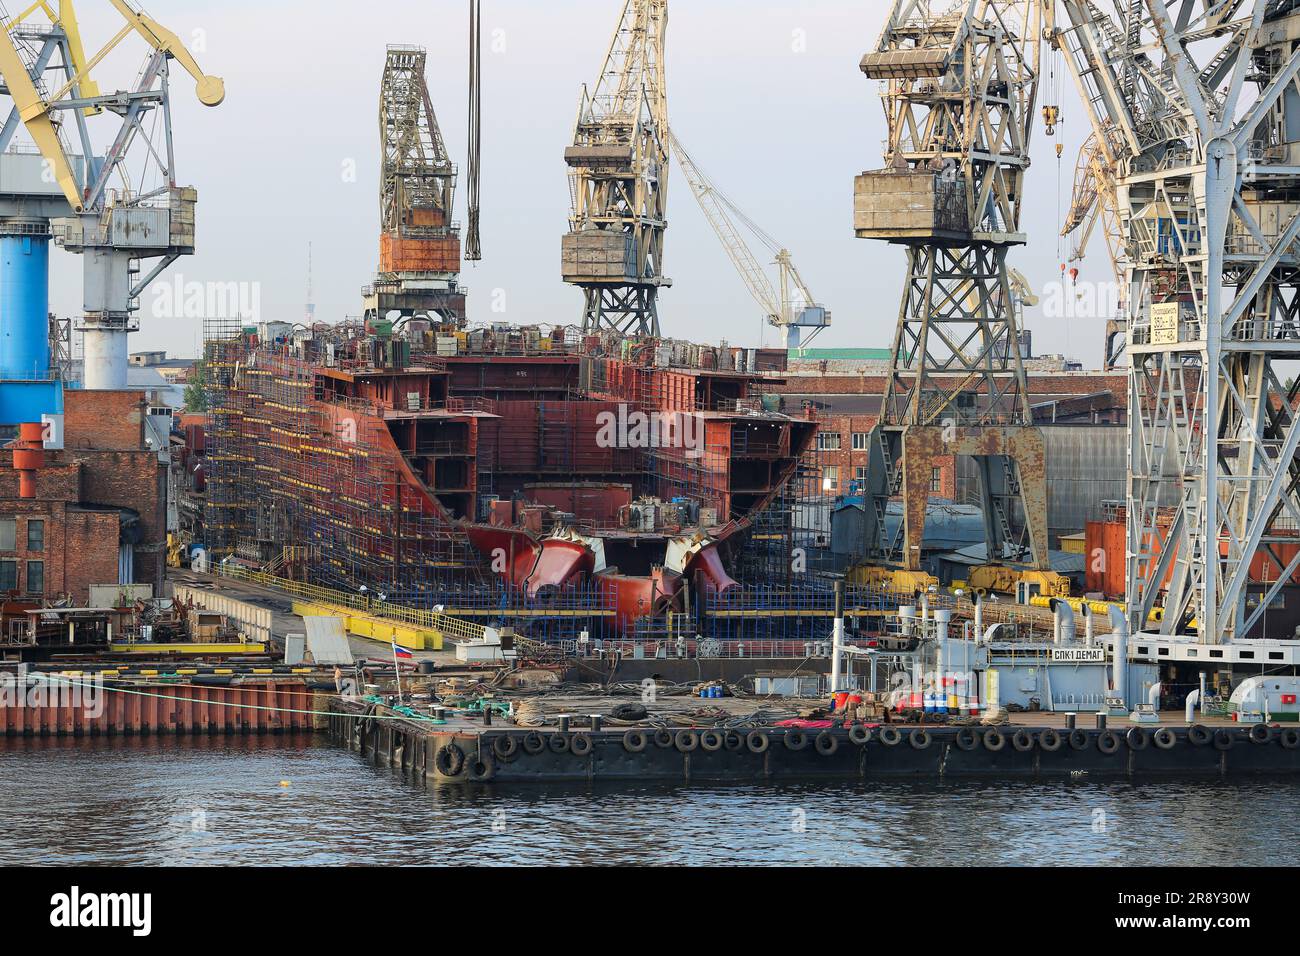 Russian icebreaker Ural (Урал), world's largest & most powerful nuclear powered icebreakers under construction, Baltic Shipyard drydock, St Petersburg Stock Photo